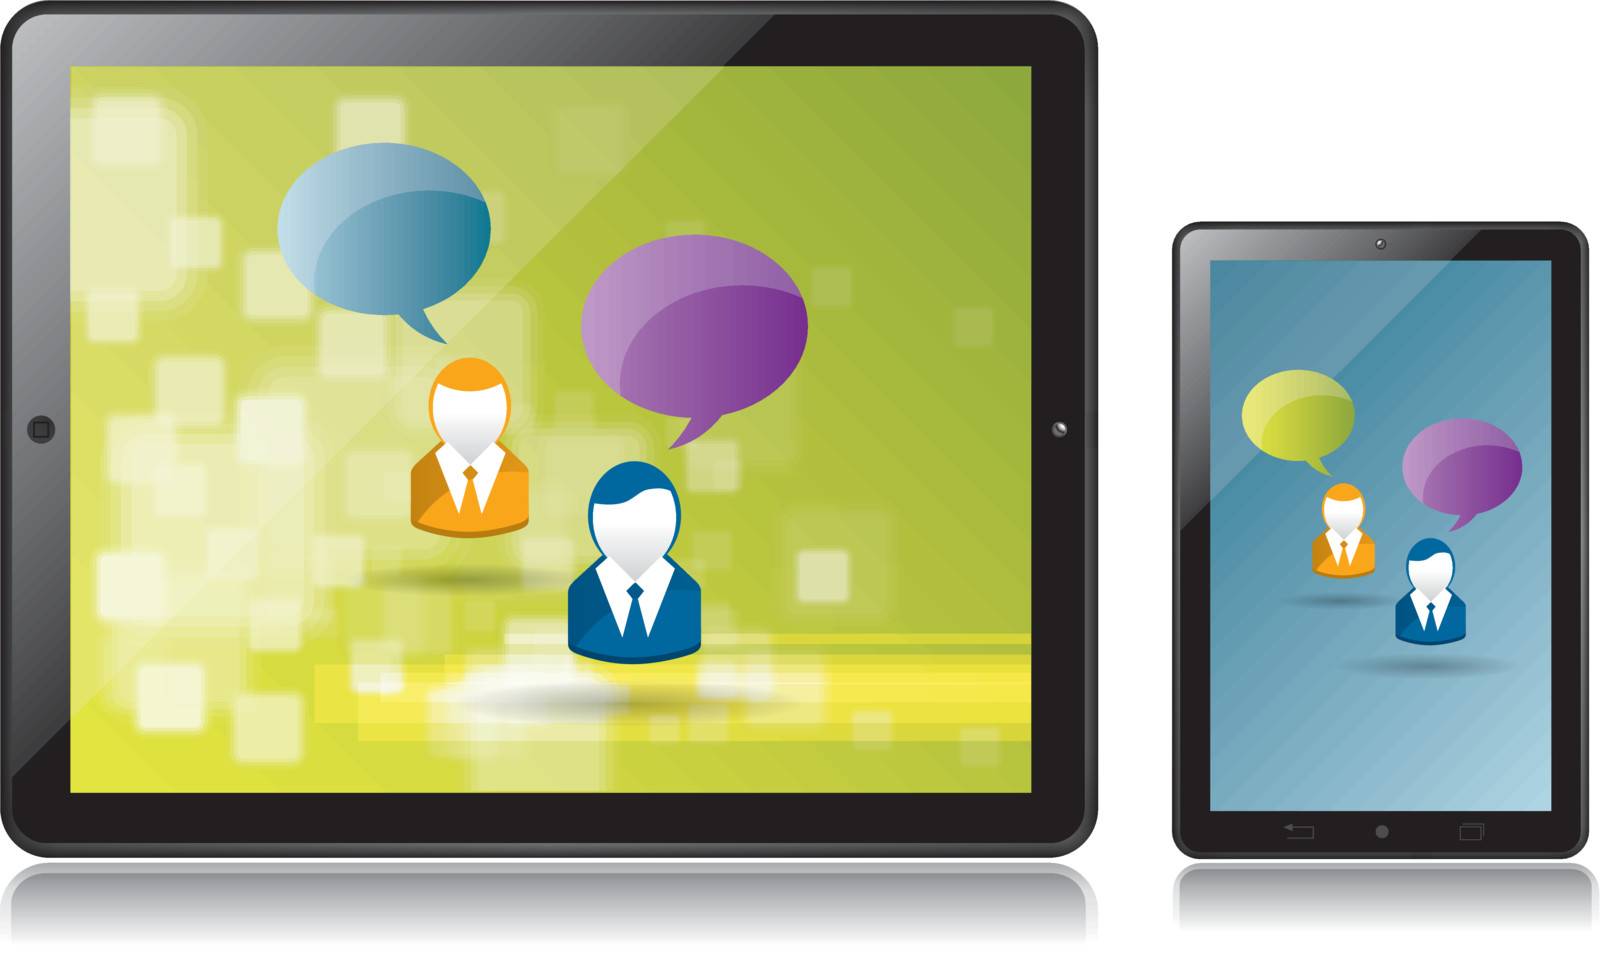 communication and generating business through social network